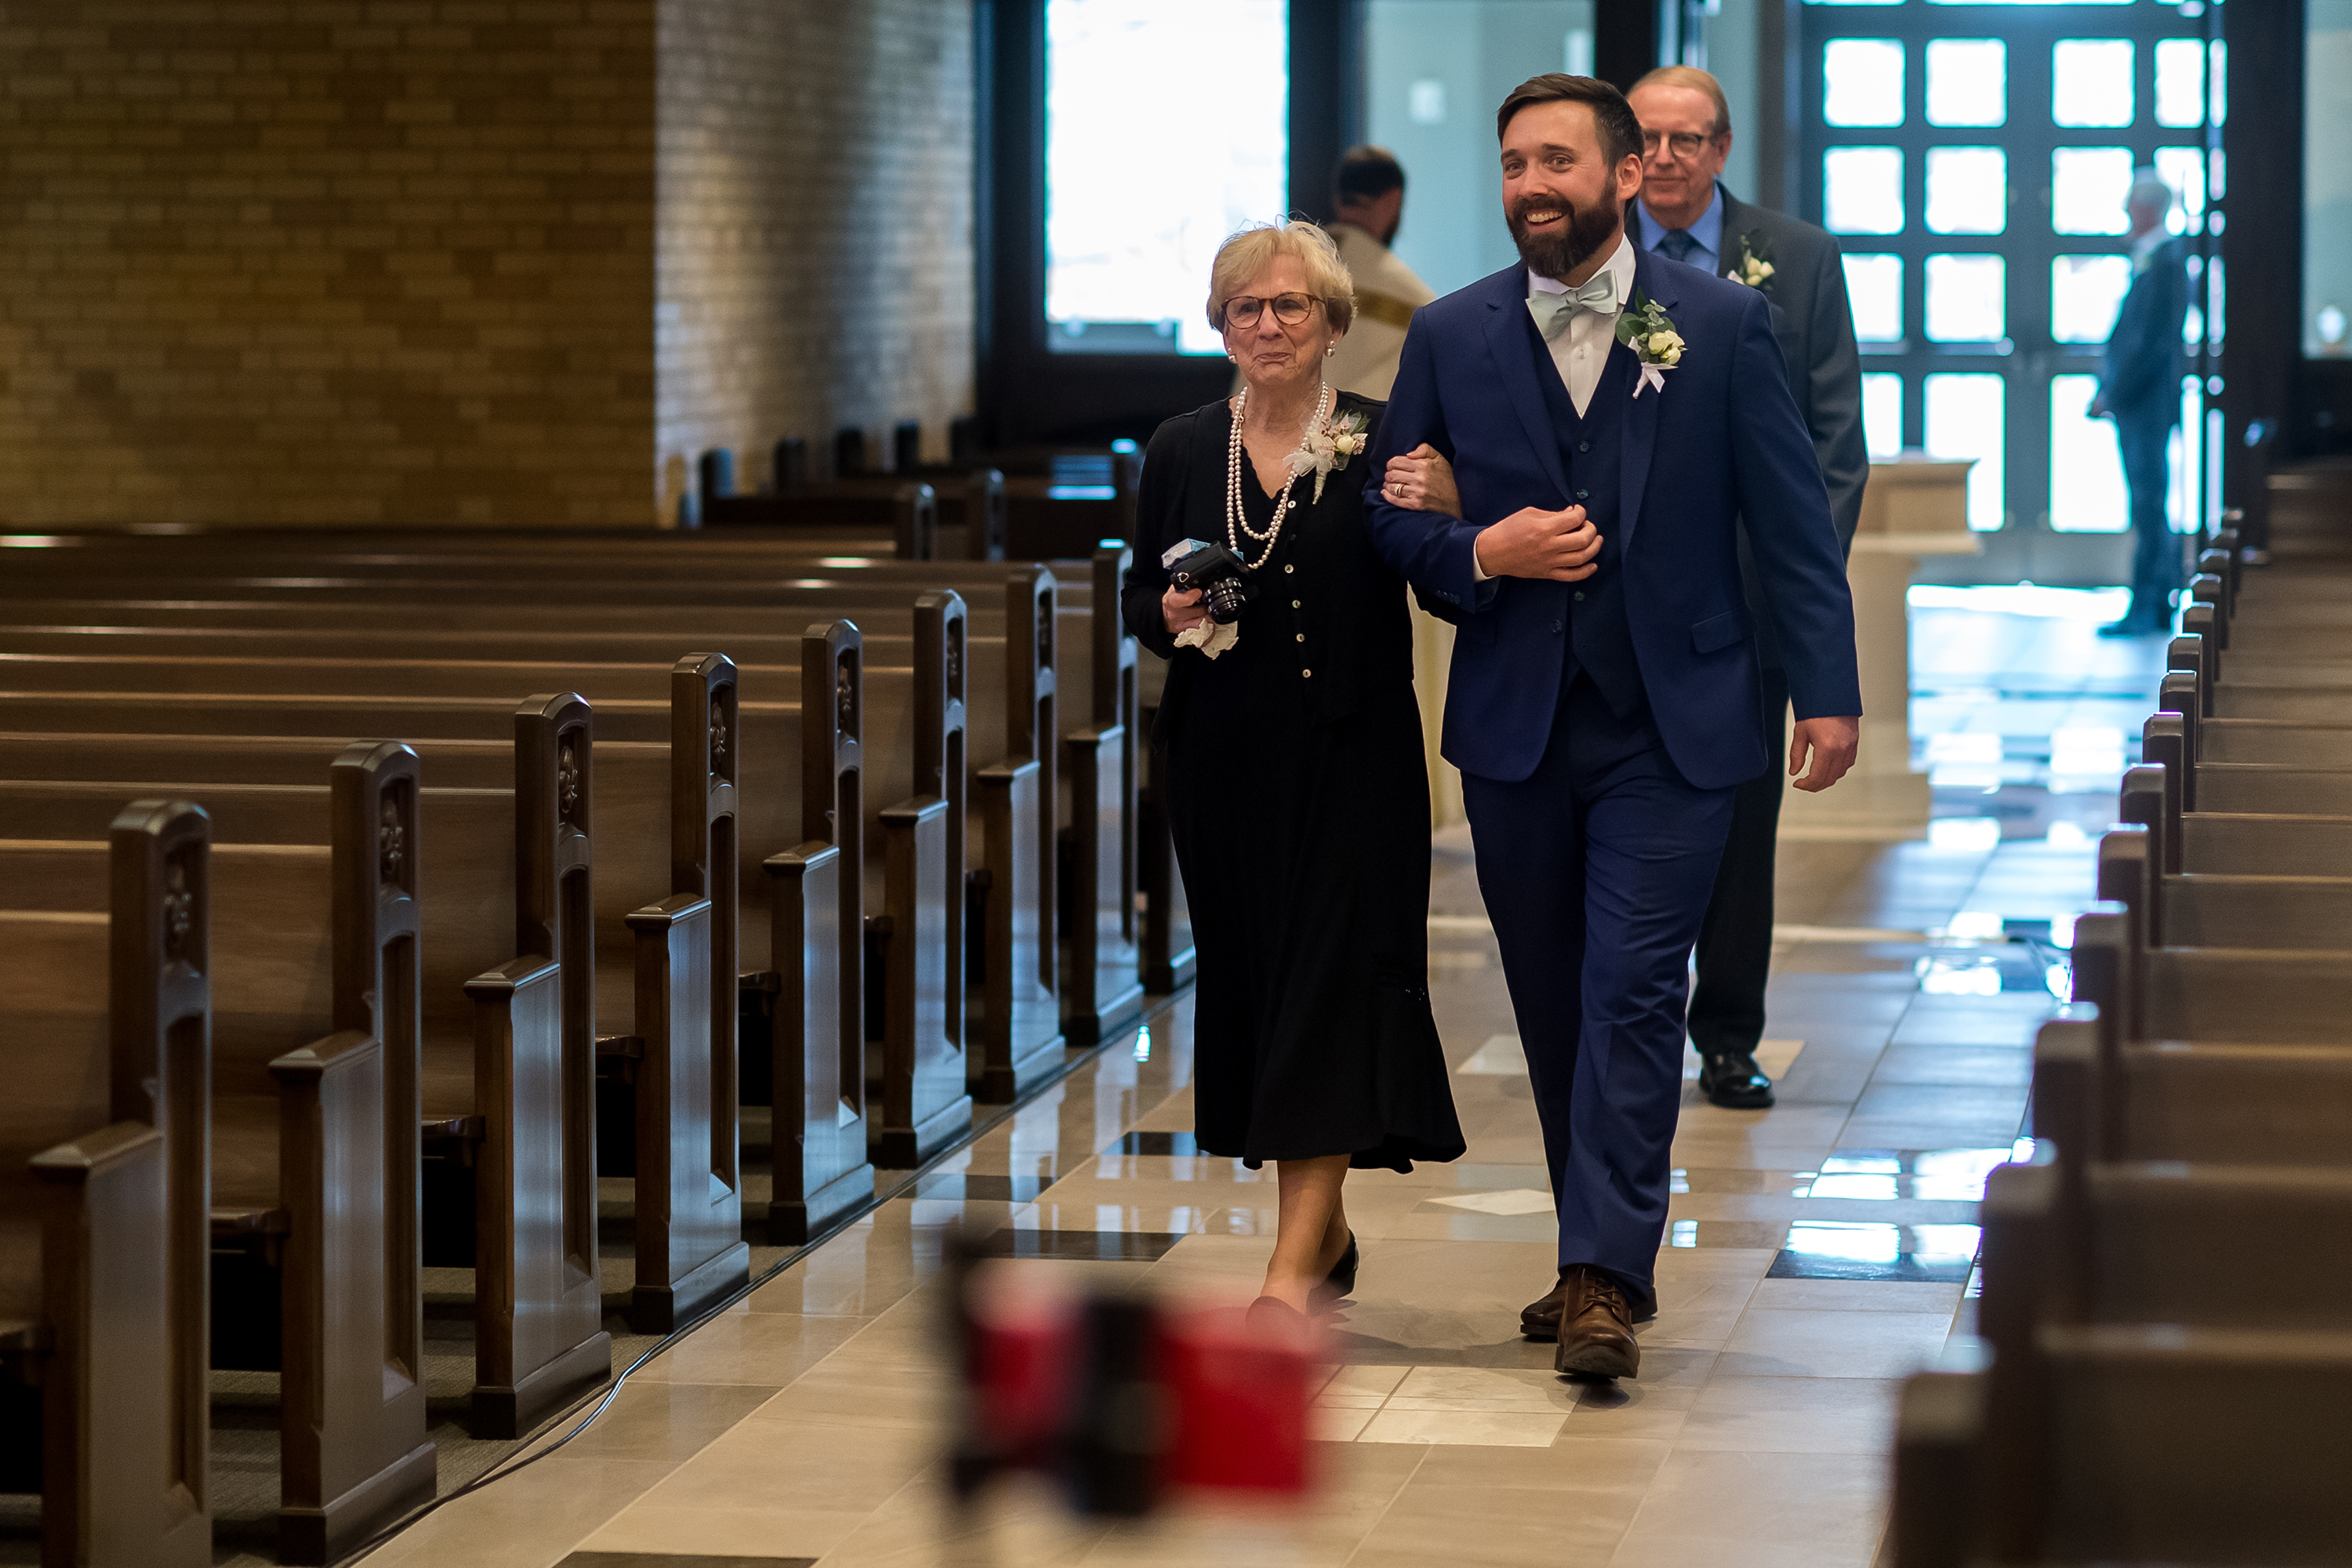 Groom walks his mother down the aisle during a wedding Mass at Our Lady of Lourdes Catholic Church in Denver, Colorado.